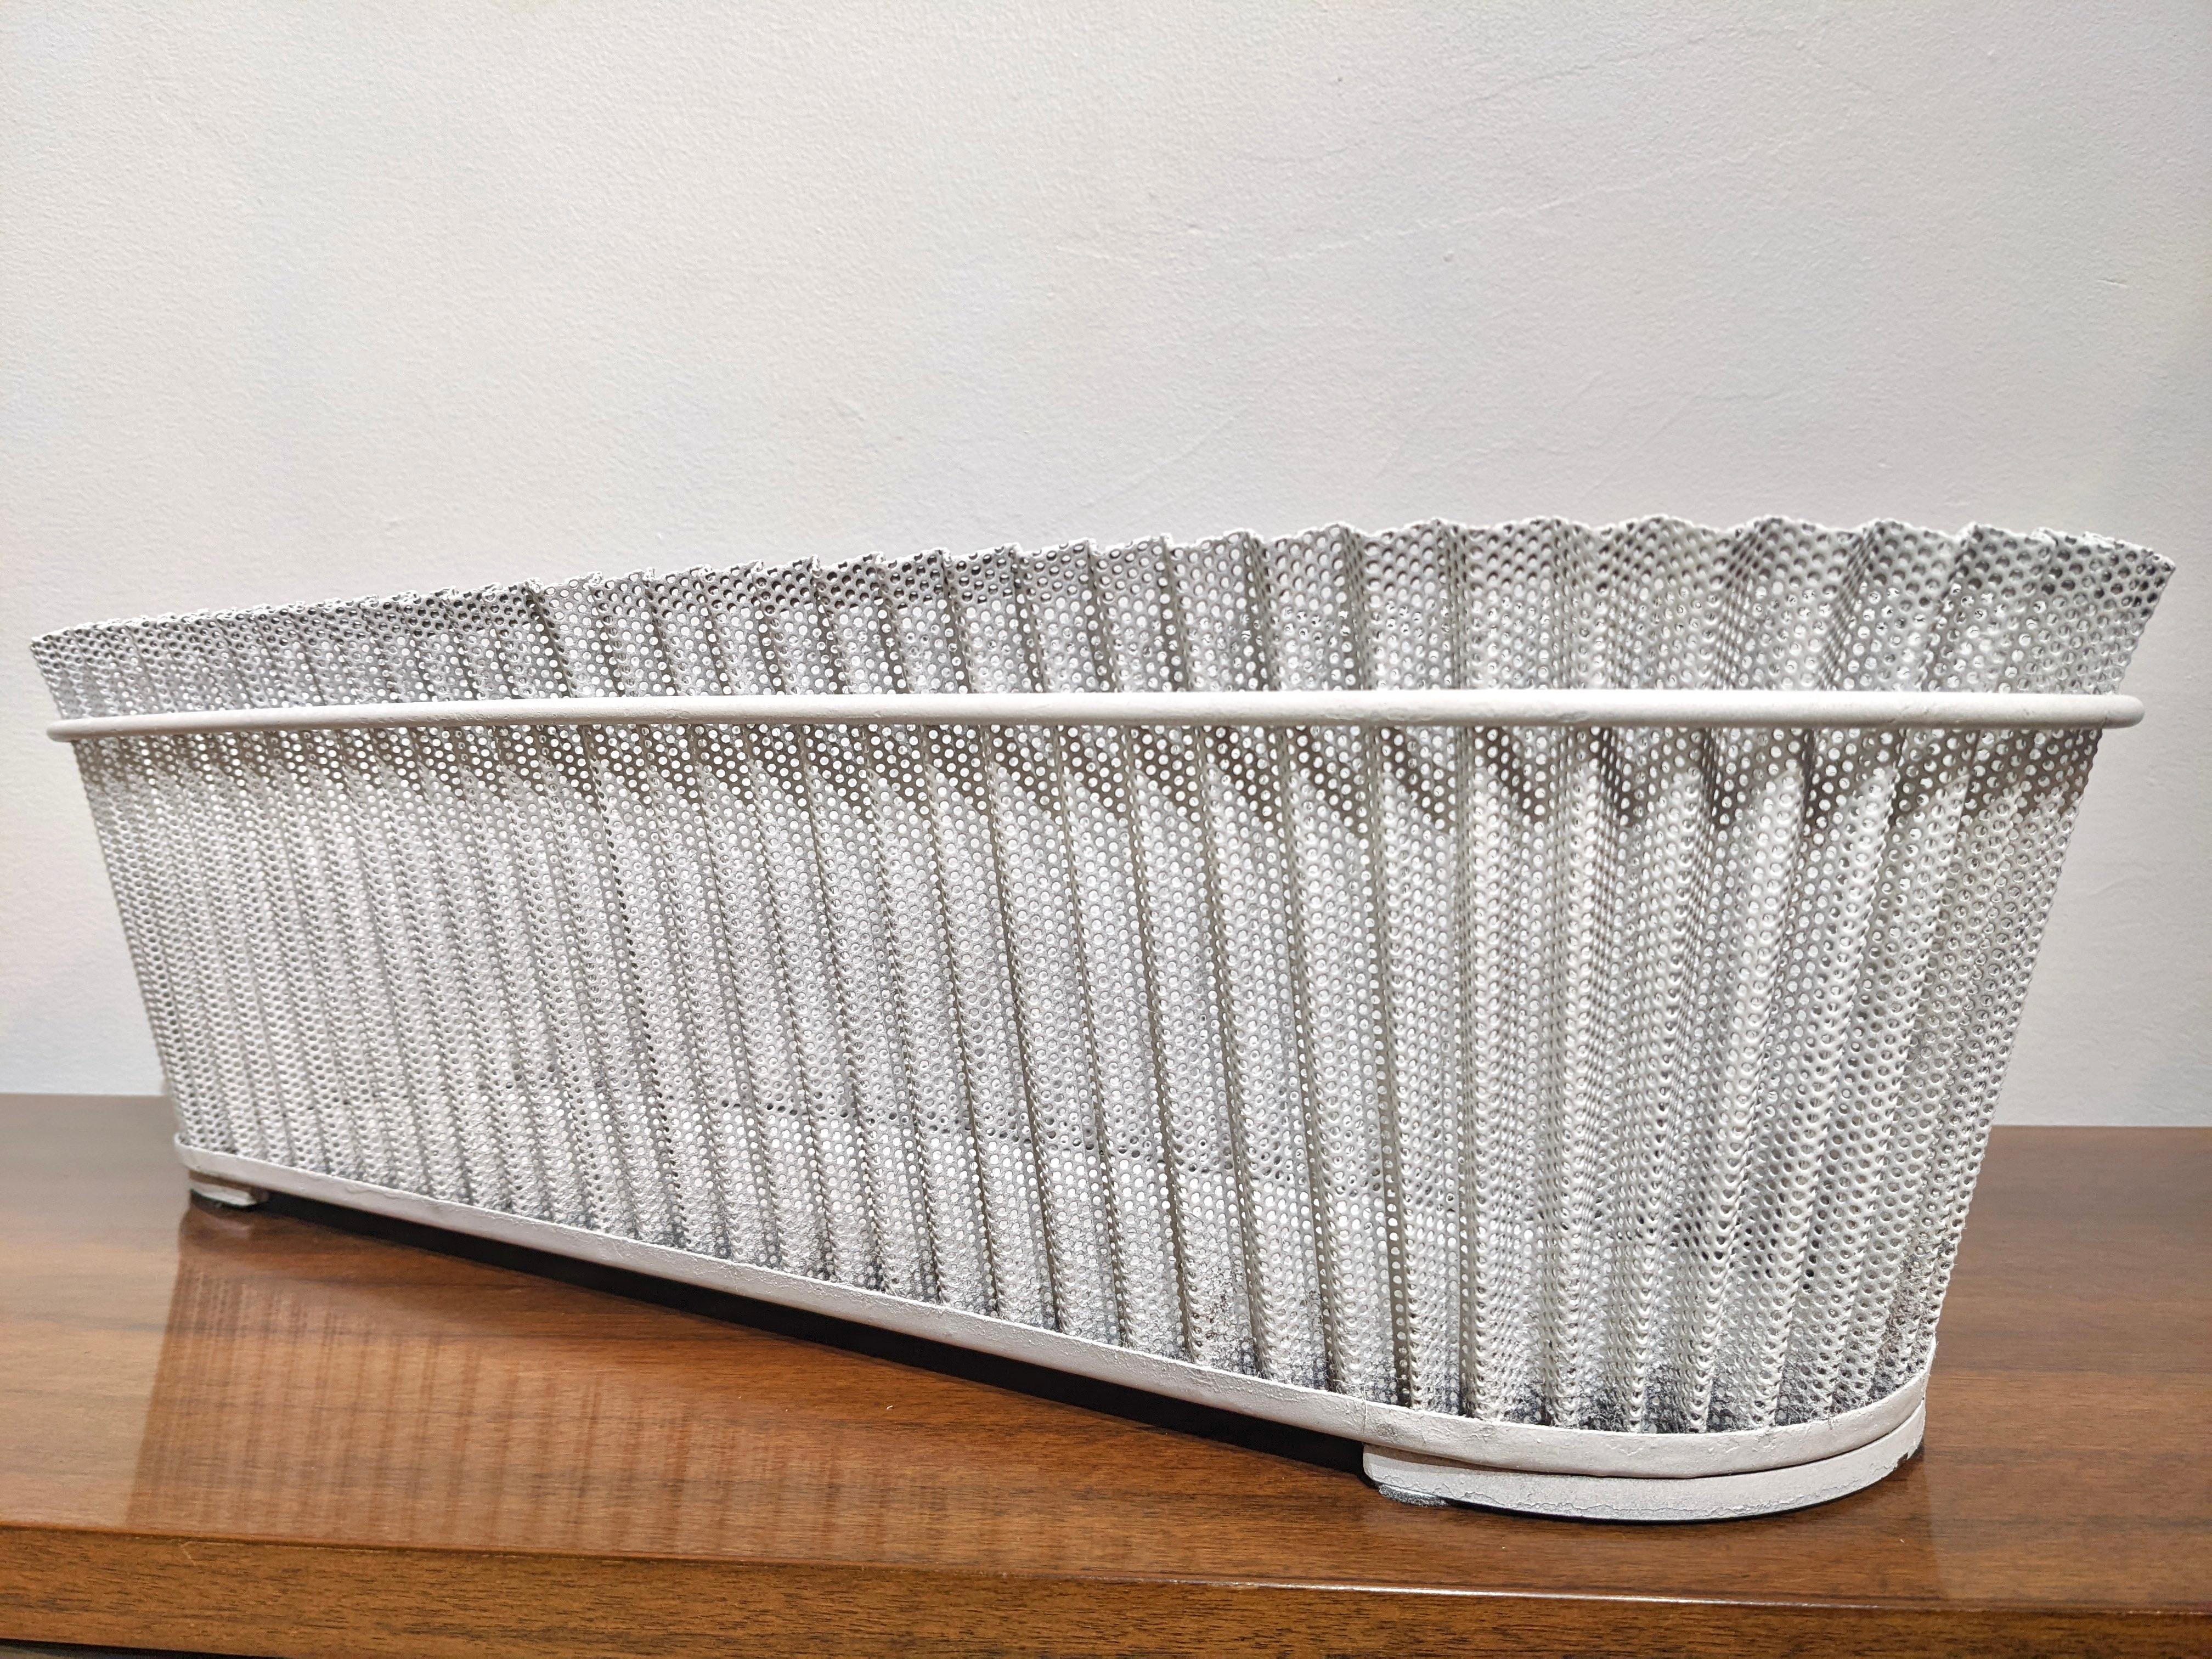 Planter in white perforated sheet metal by Mathieu Matégot. Circa 1960. Good condition.
The planter has been refurbished. 
Dimensions : H 19 cm x W 64 cm x D 24 cm.